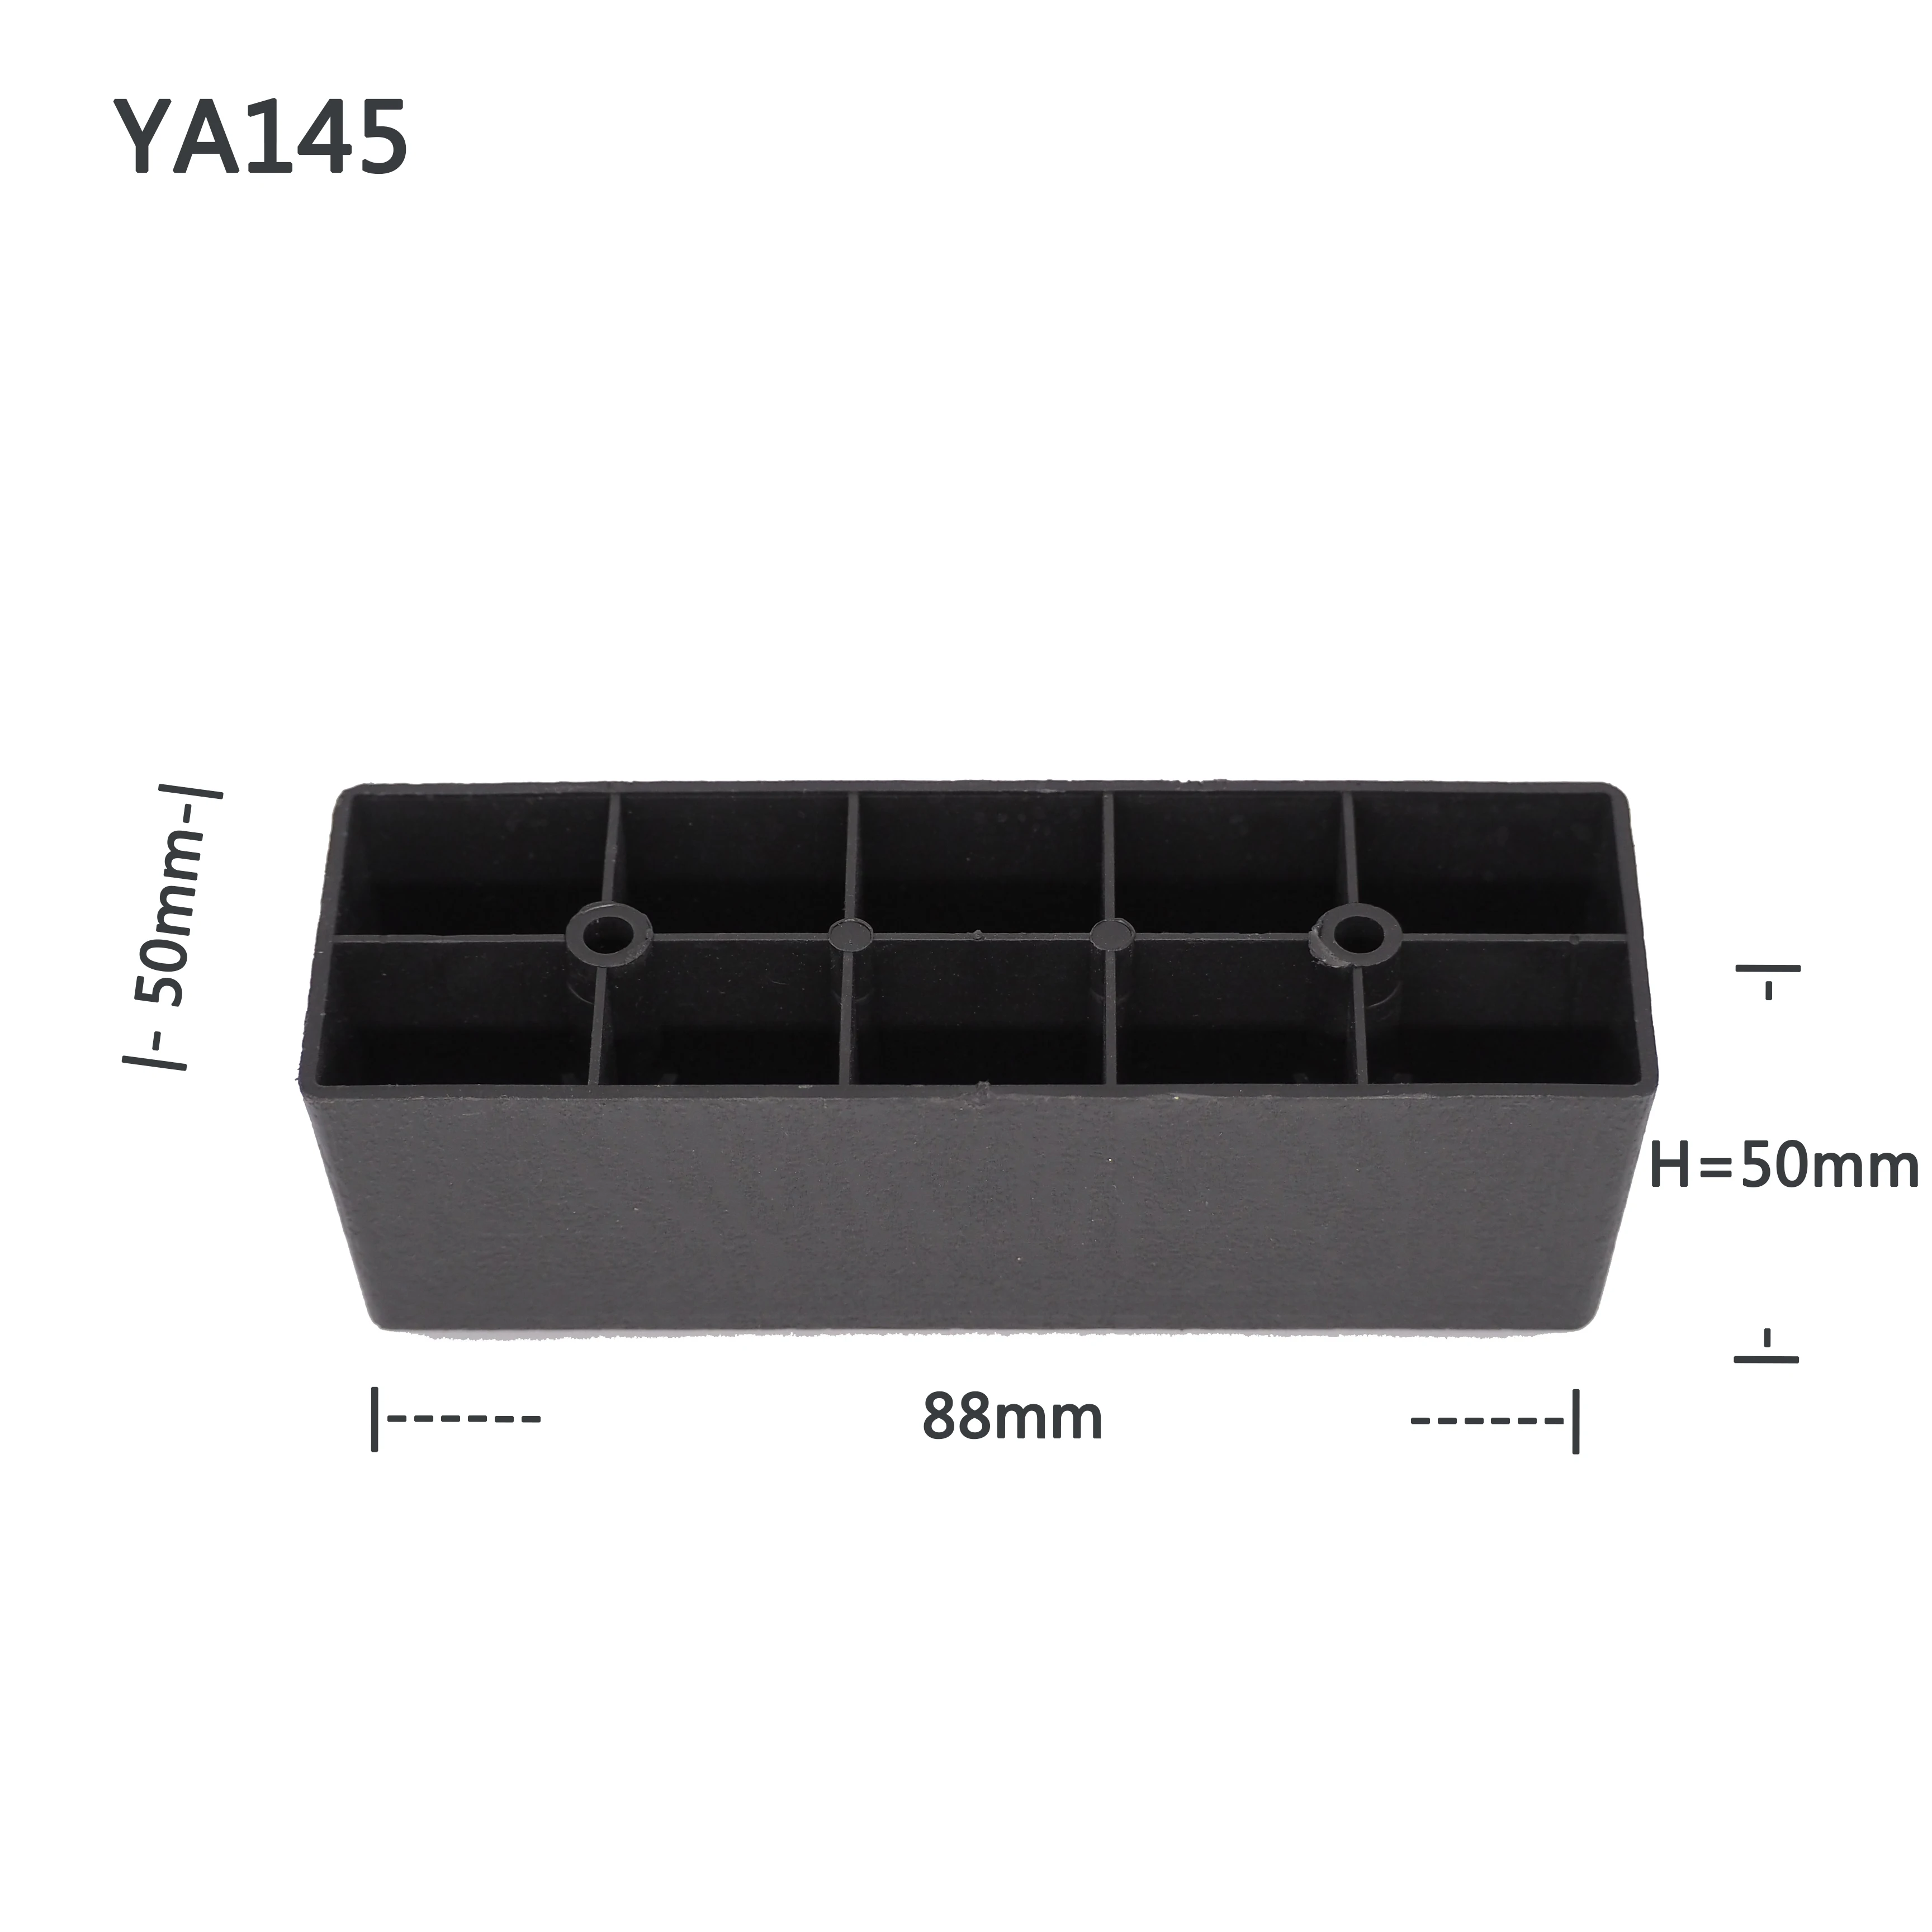 Factory Price Plastic Rectangle Sofa Legs Furniture Legs For Bed Chair